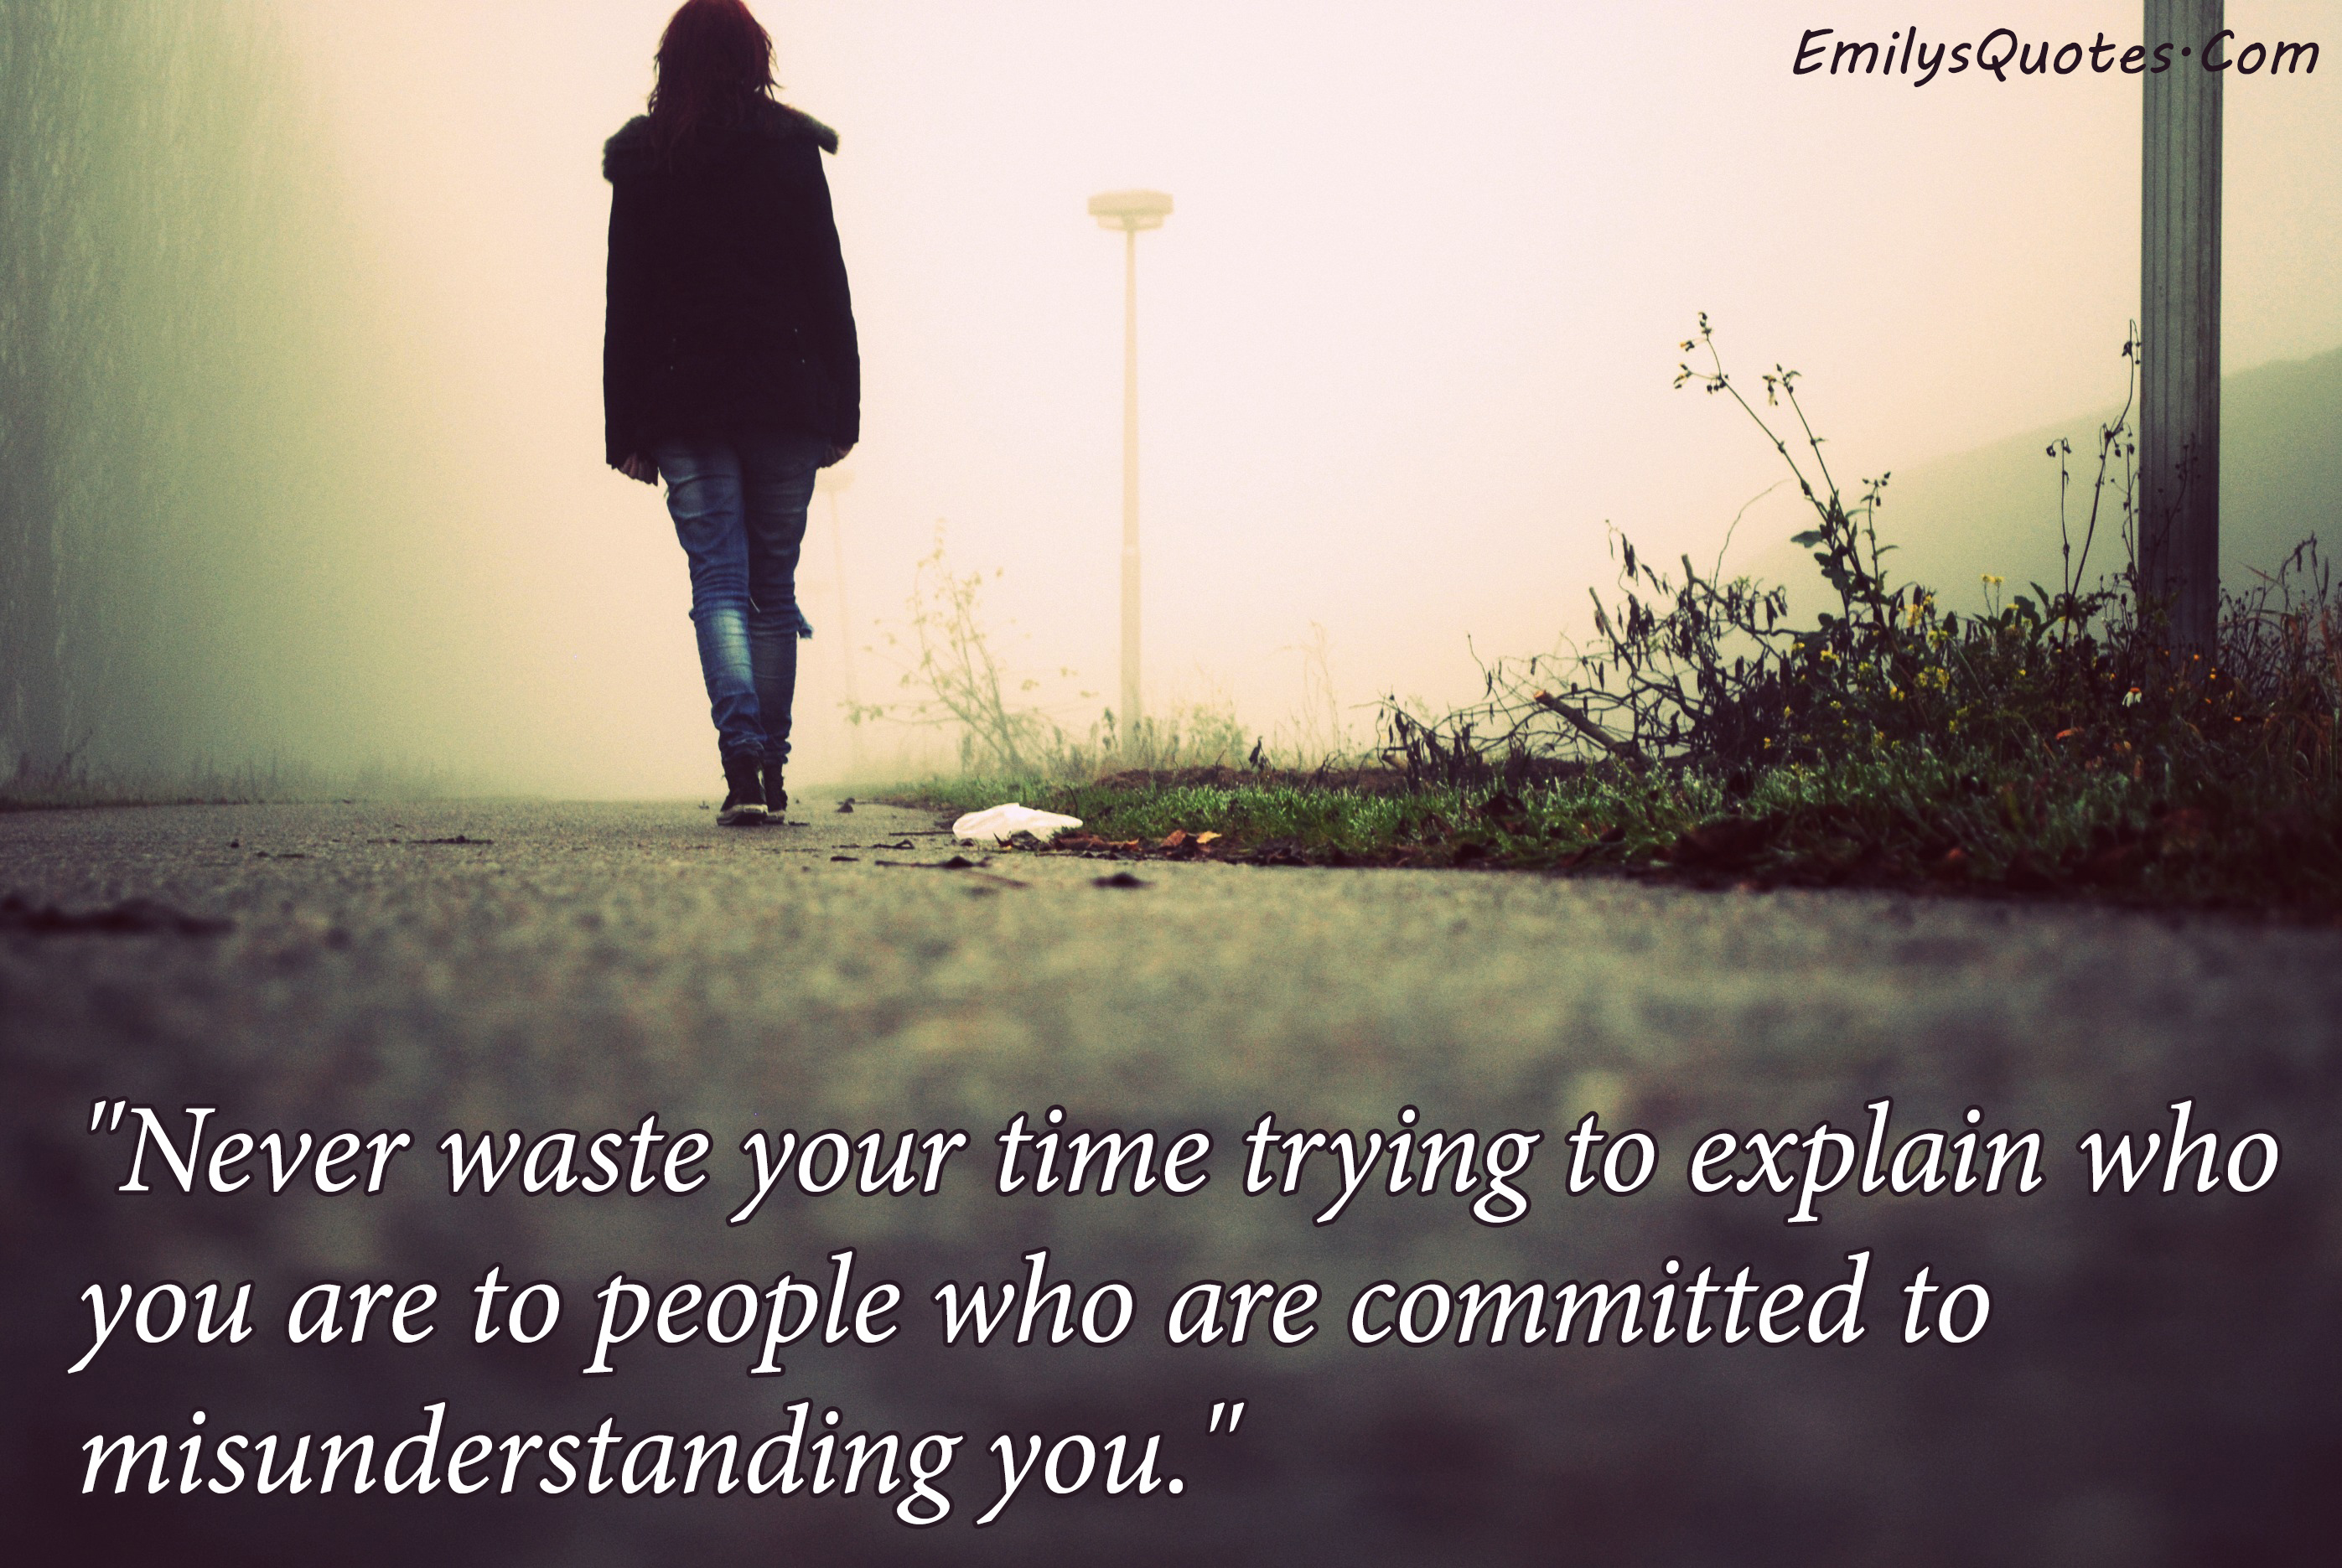 Never waste your time trying to explain who you are to people